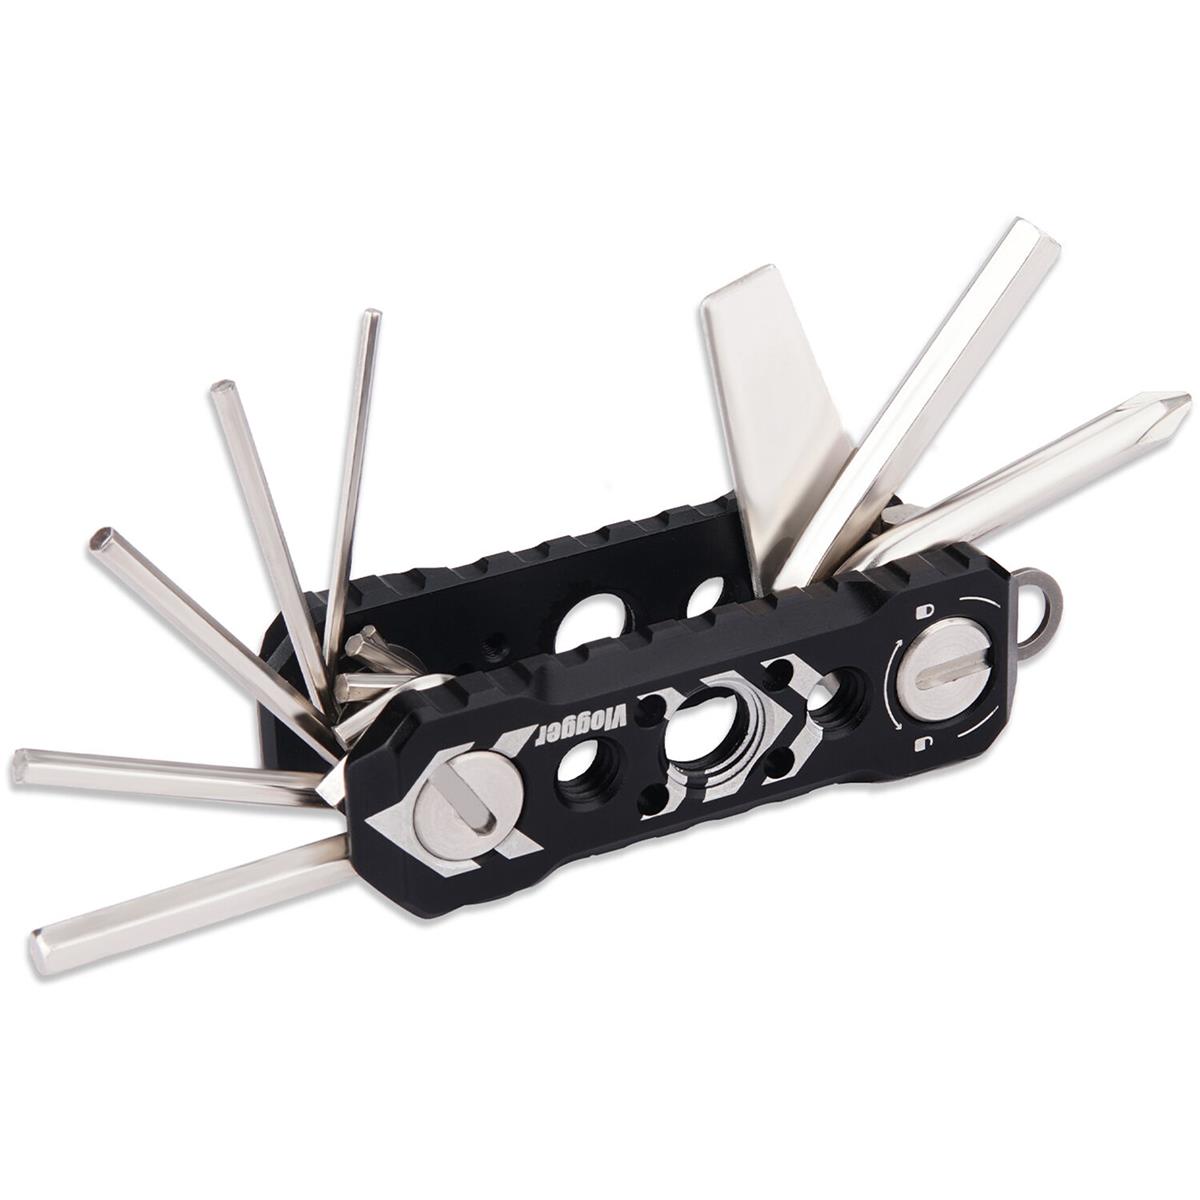 Image of AndyCine QCS Multi-Tool Folding Tool Set with Eight Functional Tools